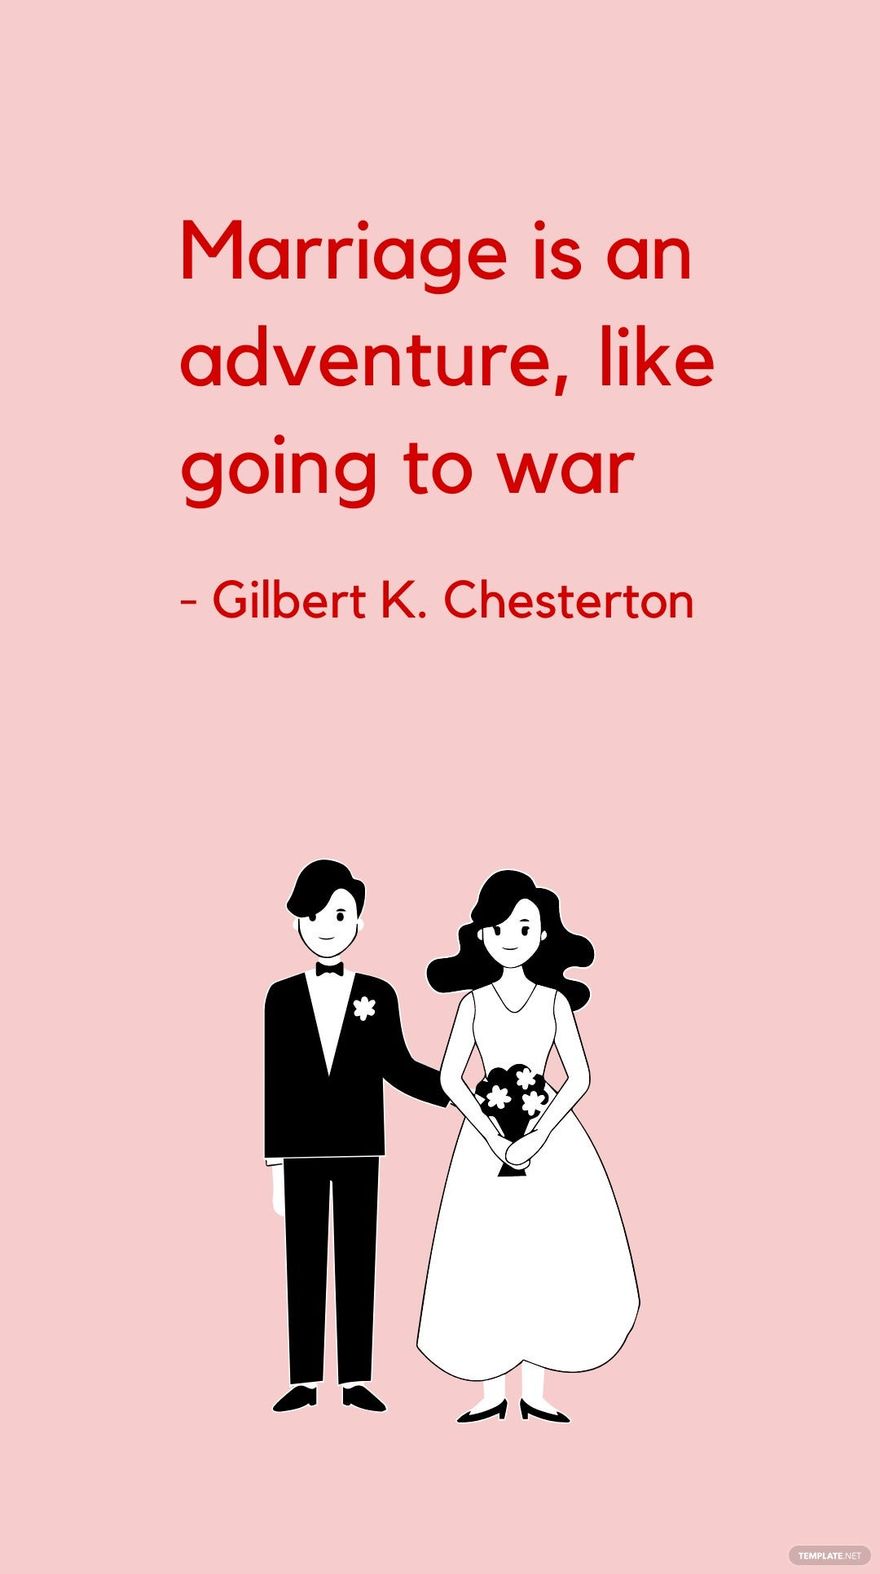 Free Gilbert K. Chesterton - Marriage is an adventure, like going to war in JPG